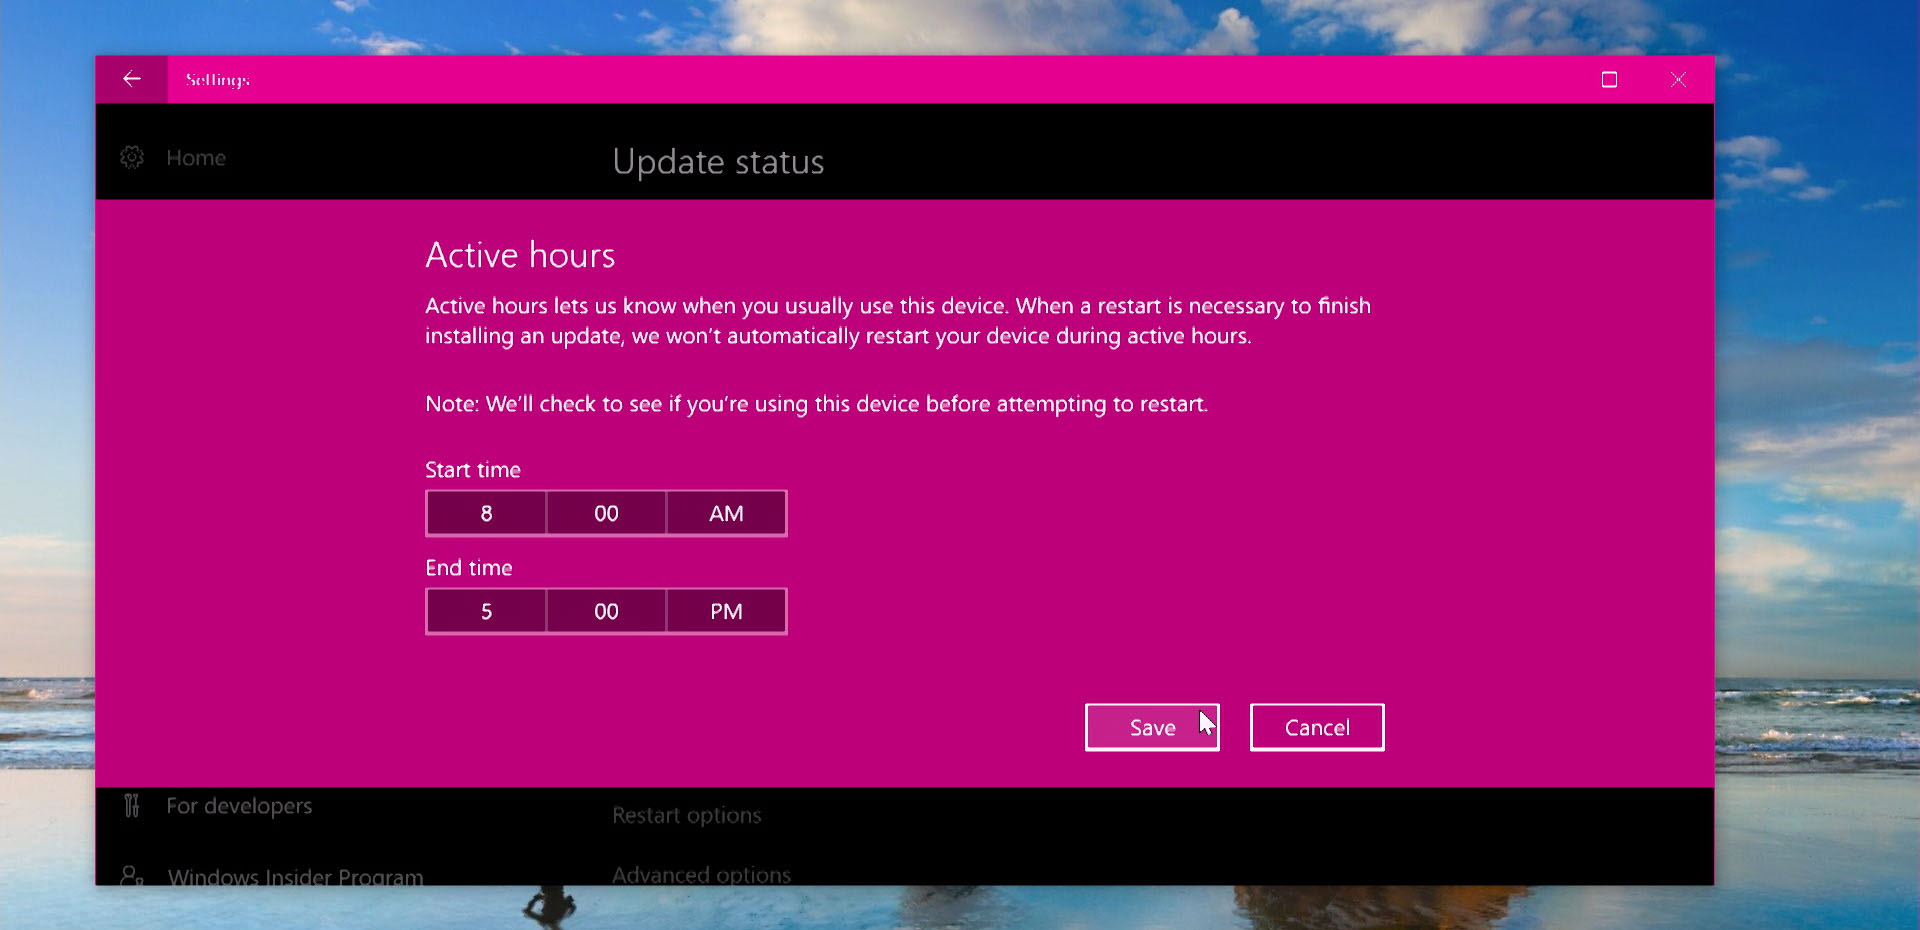 Once in a while, your PC may need to restart to finish installing an update. Setting Active hours keep restarts from happening when you’re working.